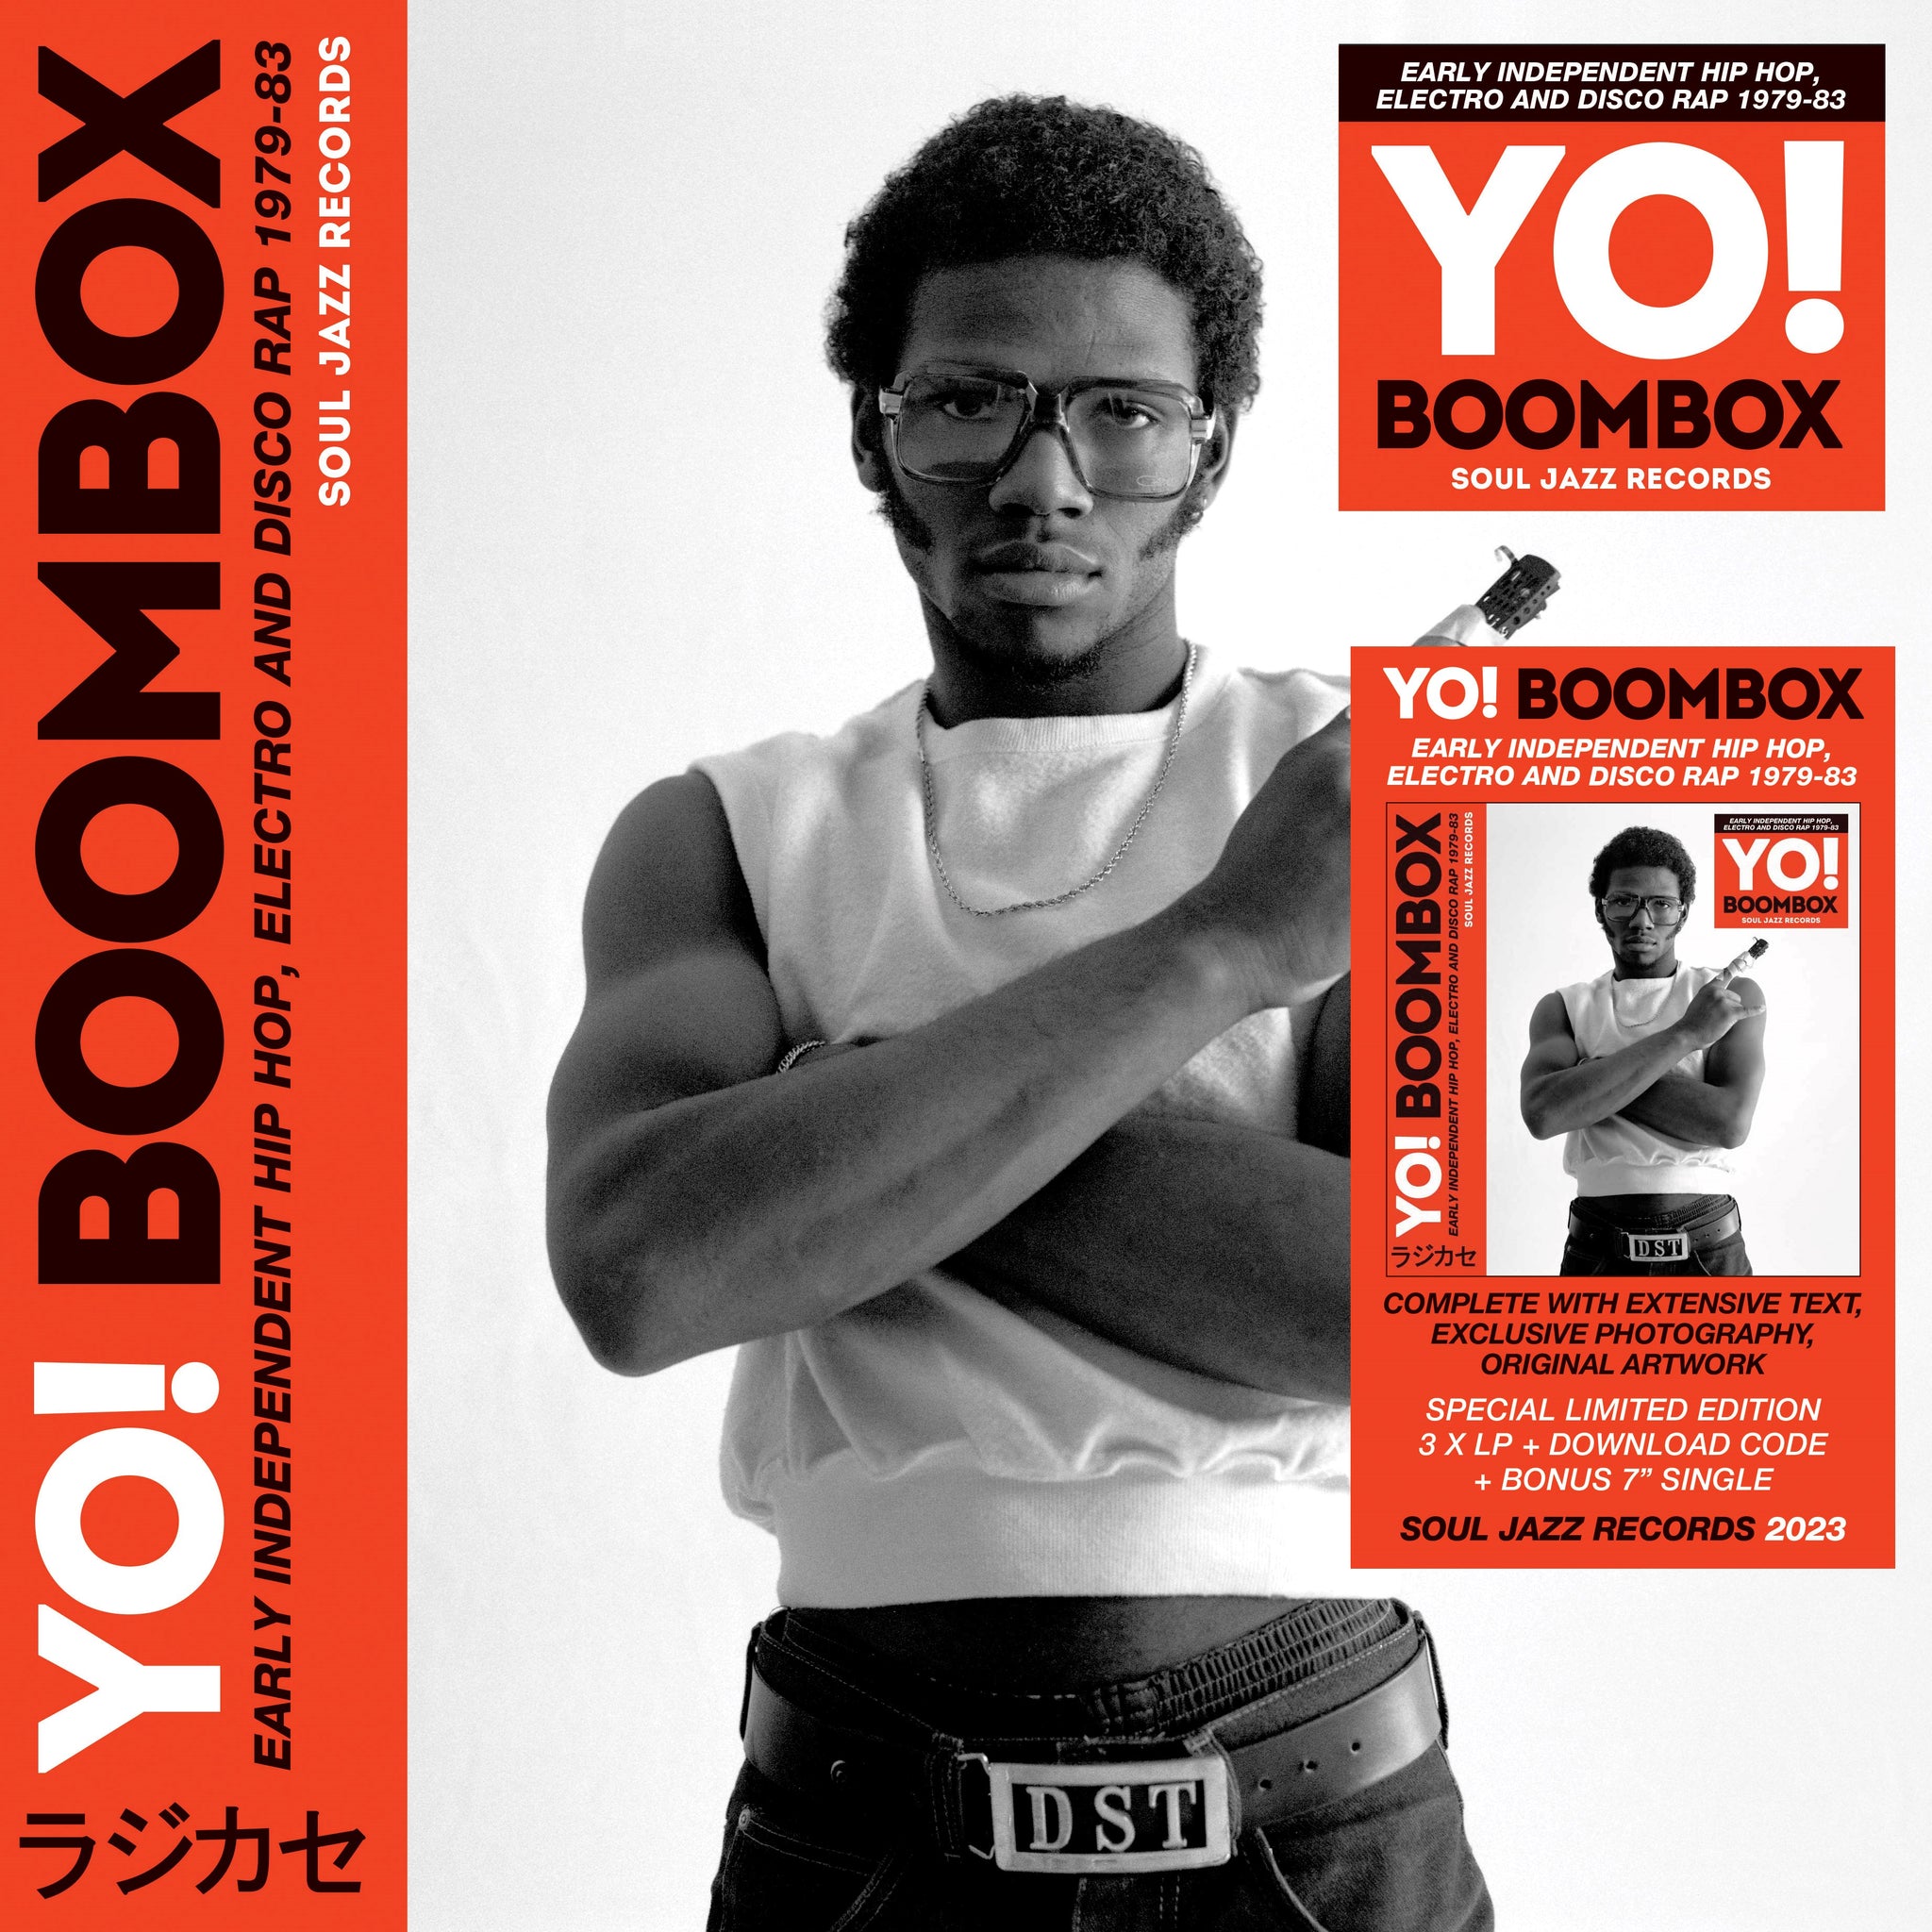 YO! BOOMBOX - Early Independent Hip Hop, Electro And Disco Rap 1979-83 (3LP)